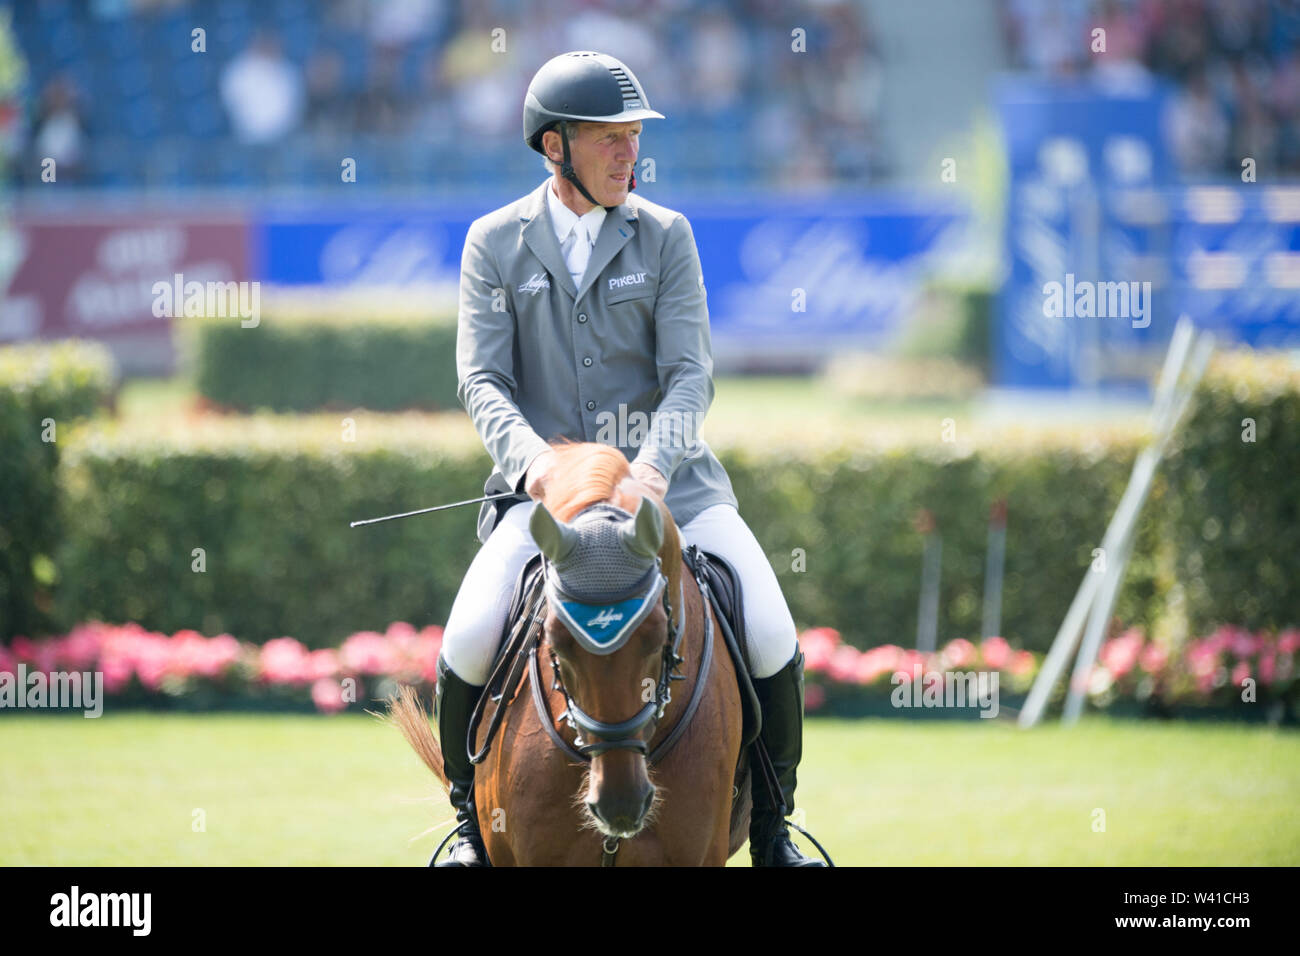 Aachen, Deutschland. 17th July, 2019. Ludger BEERBAUM, GER, on Casello, Turkish Airlines Prize of Europe, Springprüfung mit Stechen, S4, World Equestrian Festival, CHIO Aachen 2019 from 16.07 - 21.07.2019 in Aachen/Germany; | Usage worldwide Credit: dpa/Alamy Live News Stock Photo